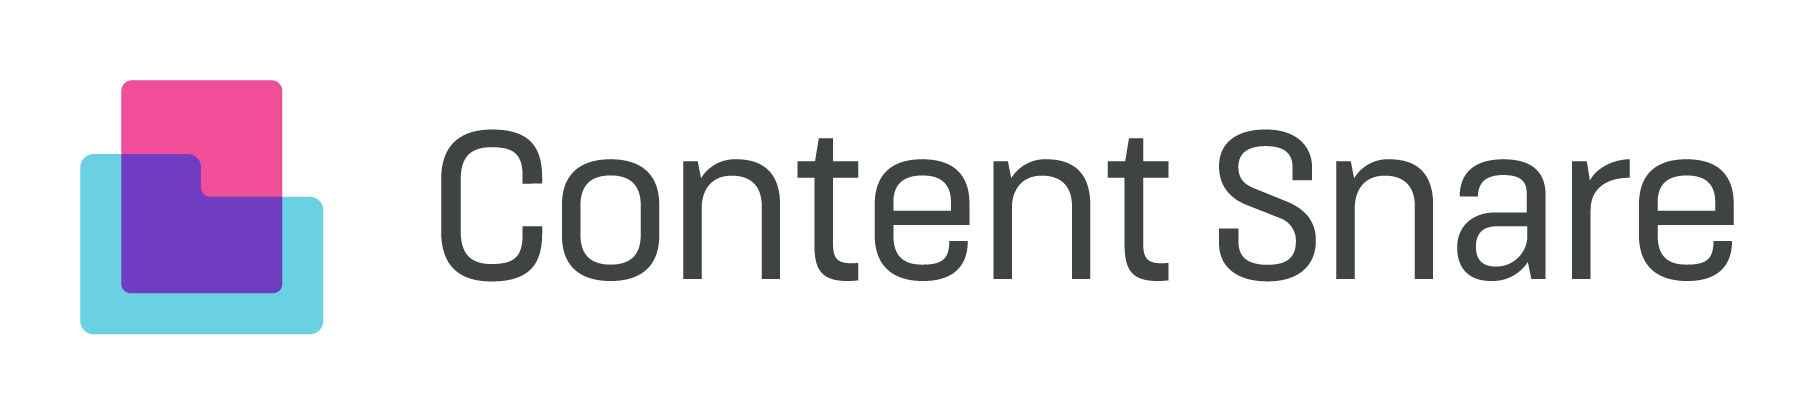 Content Snare logo